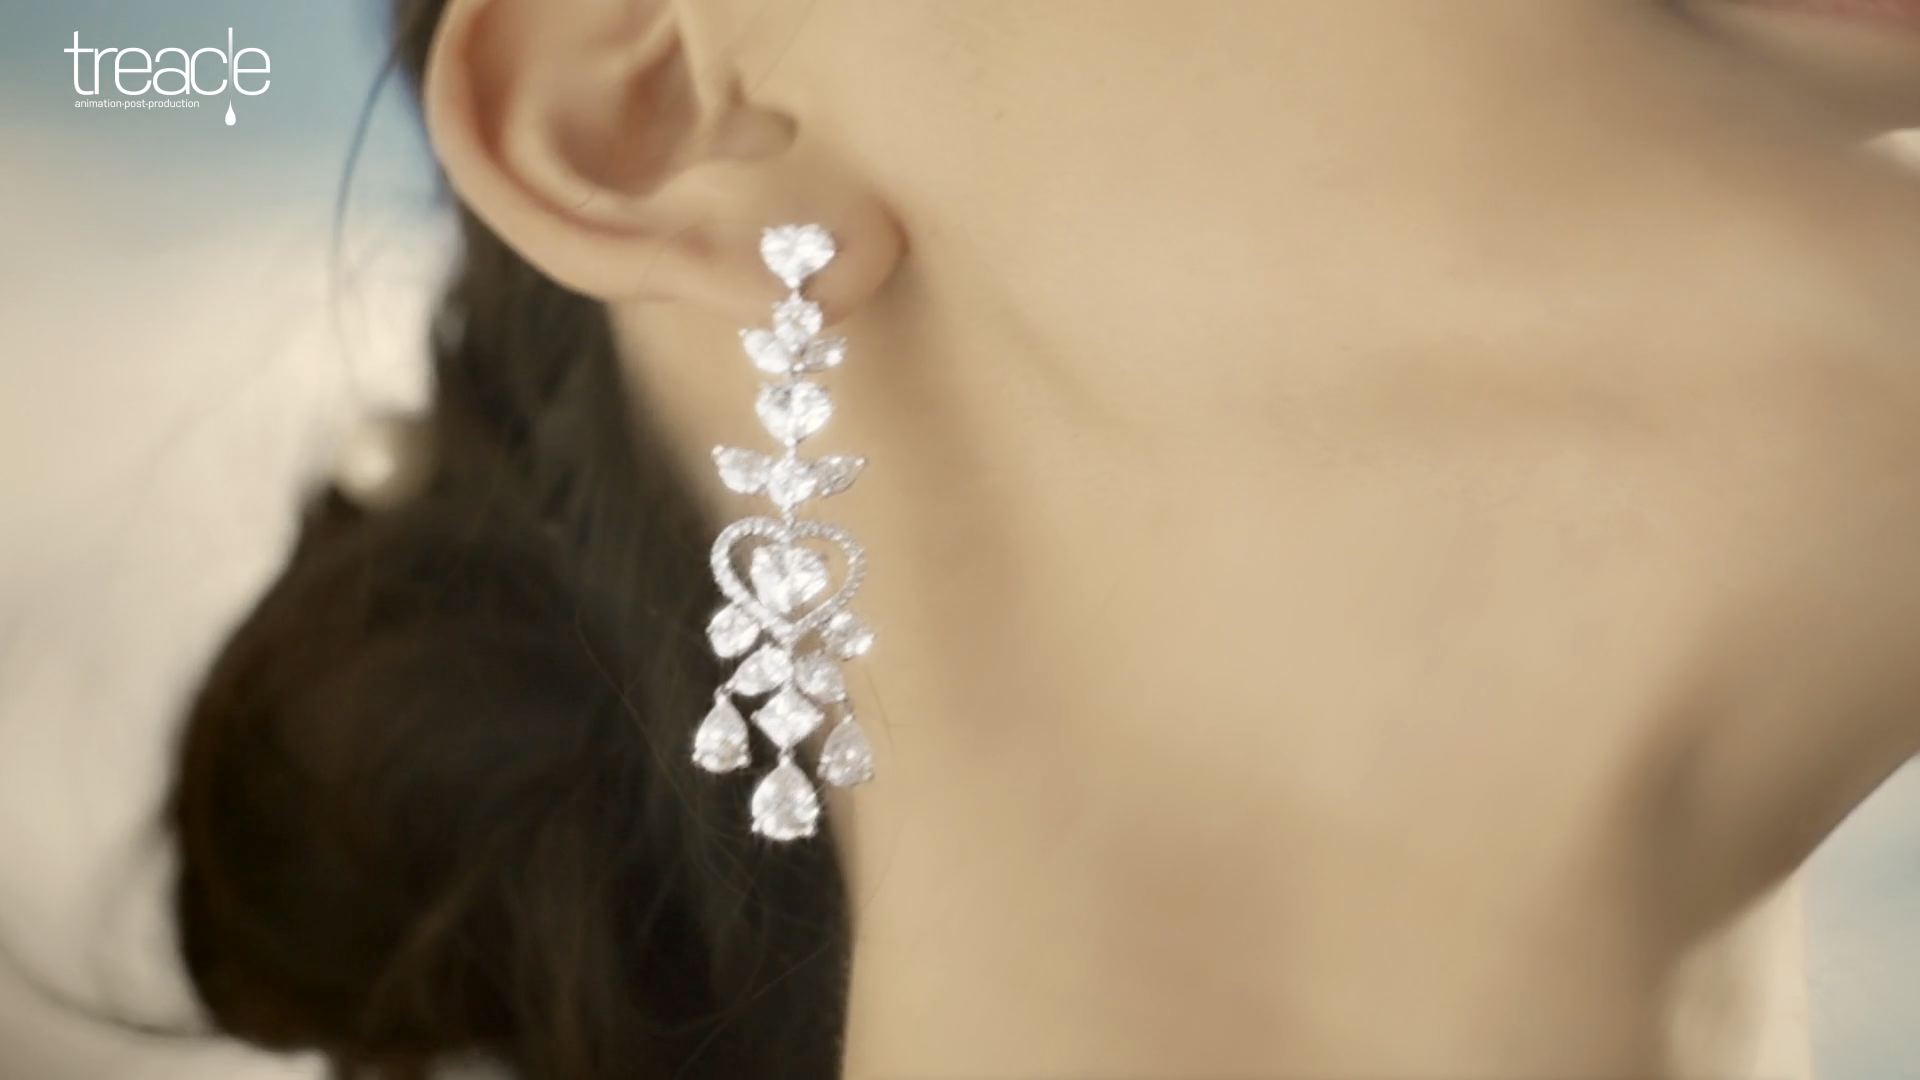 A close-up of a diamond earring worn by a bride